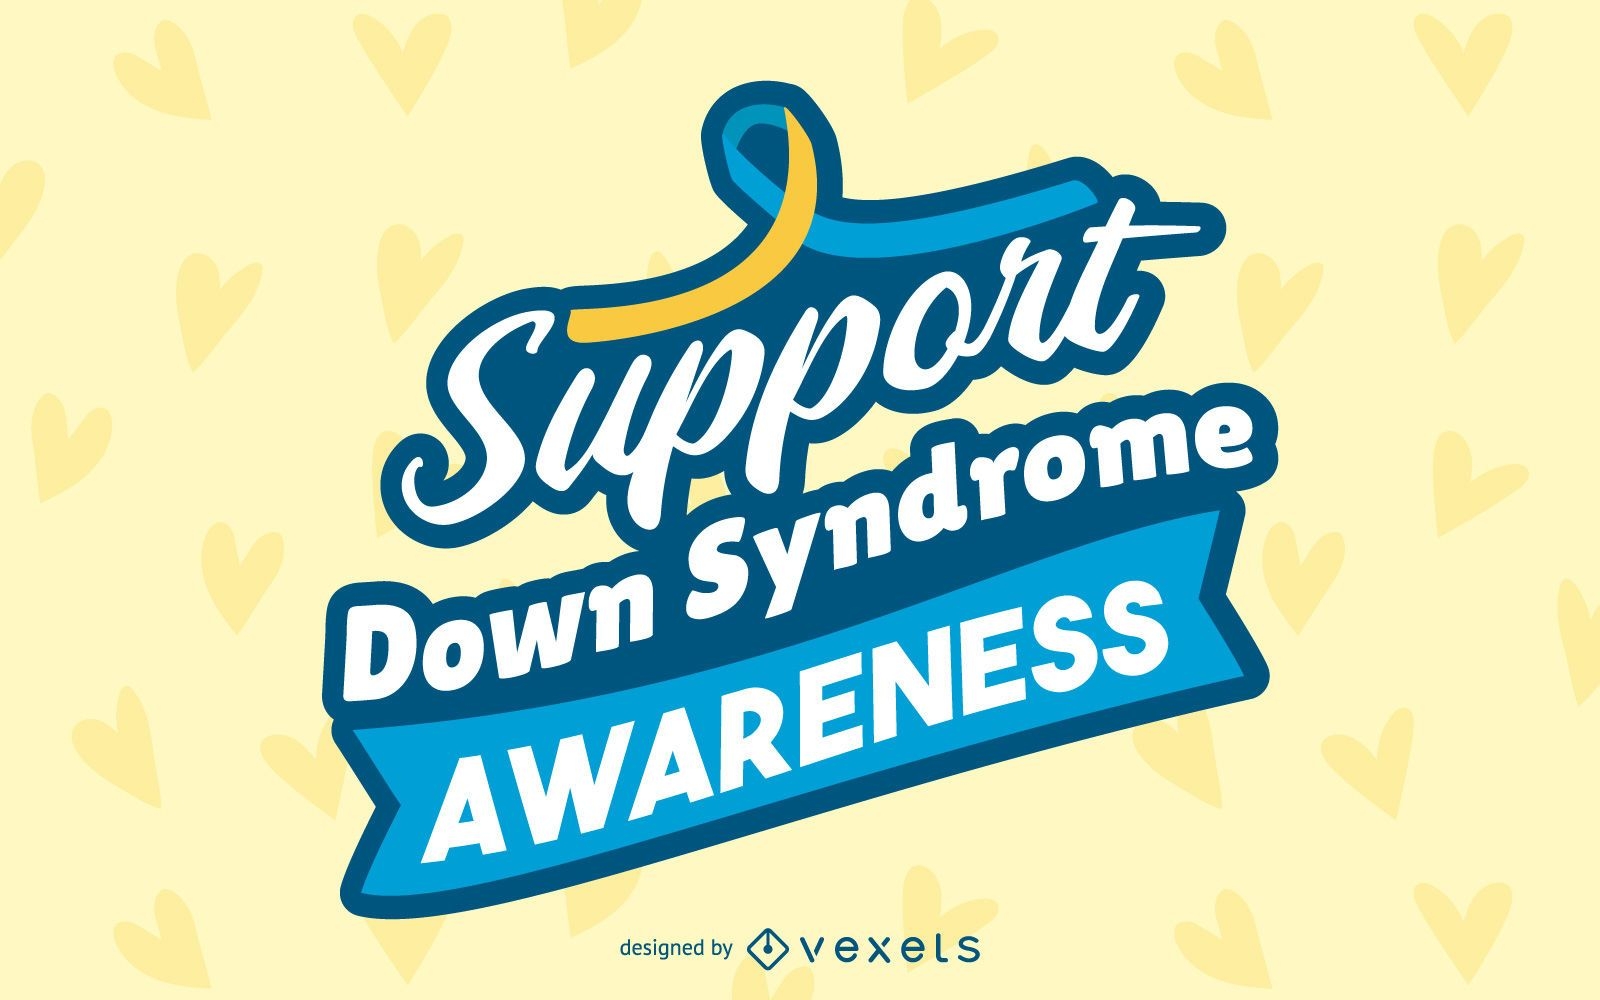 Down syndrome awareness lettering design